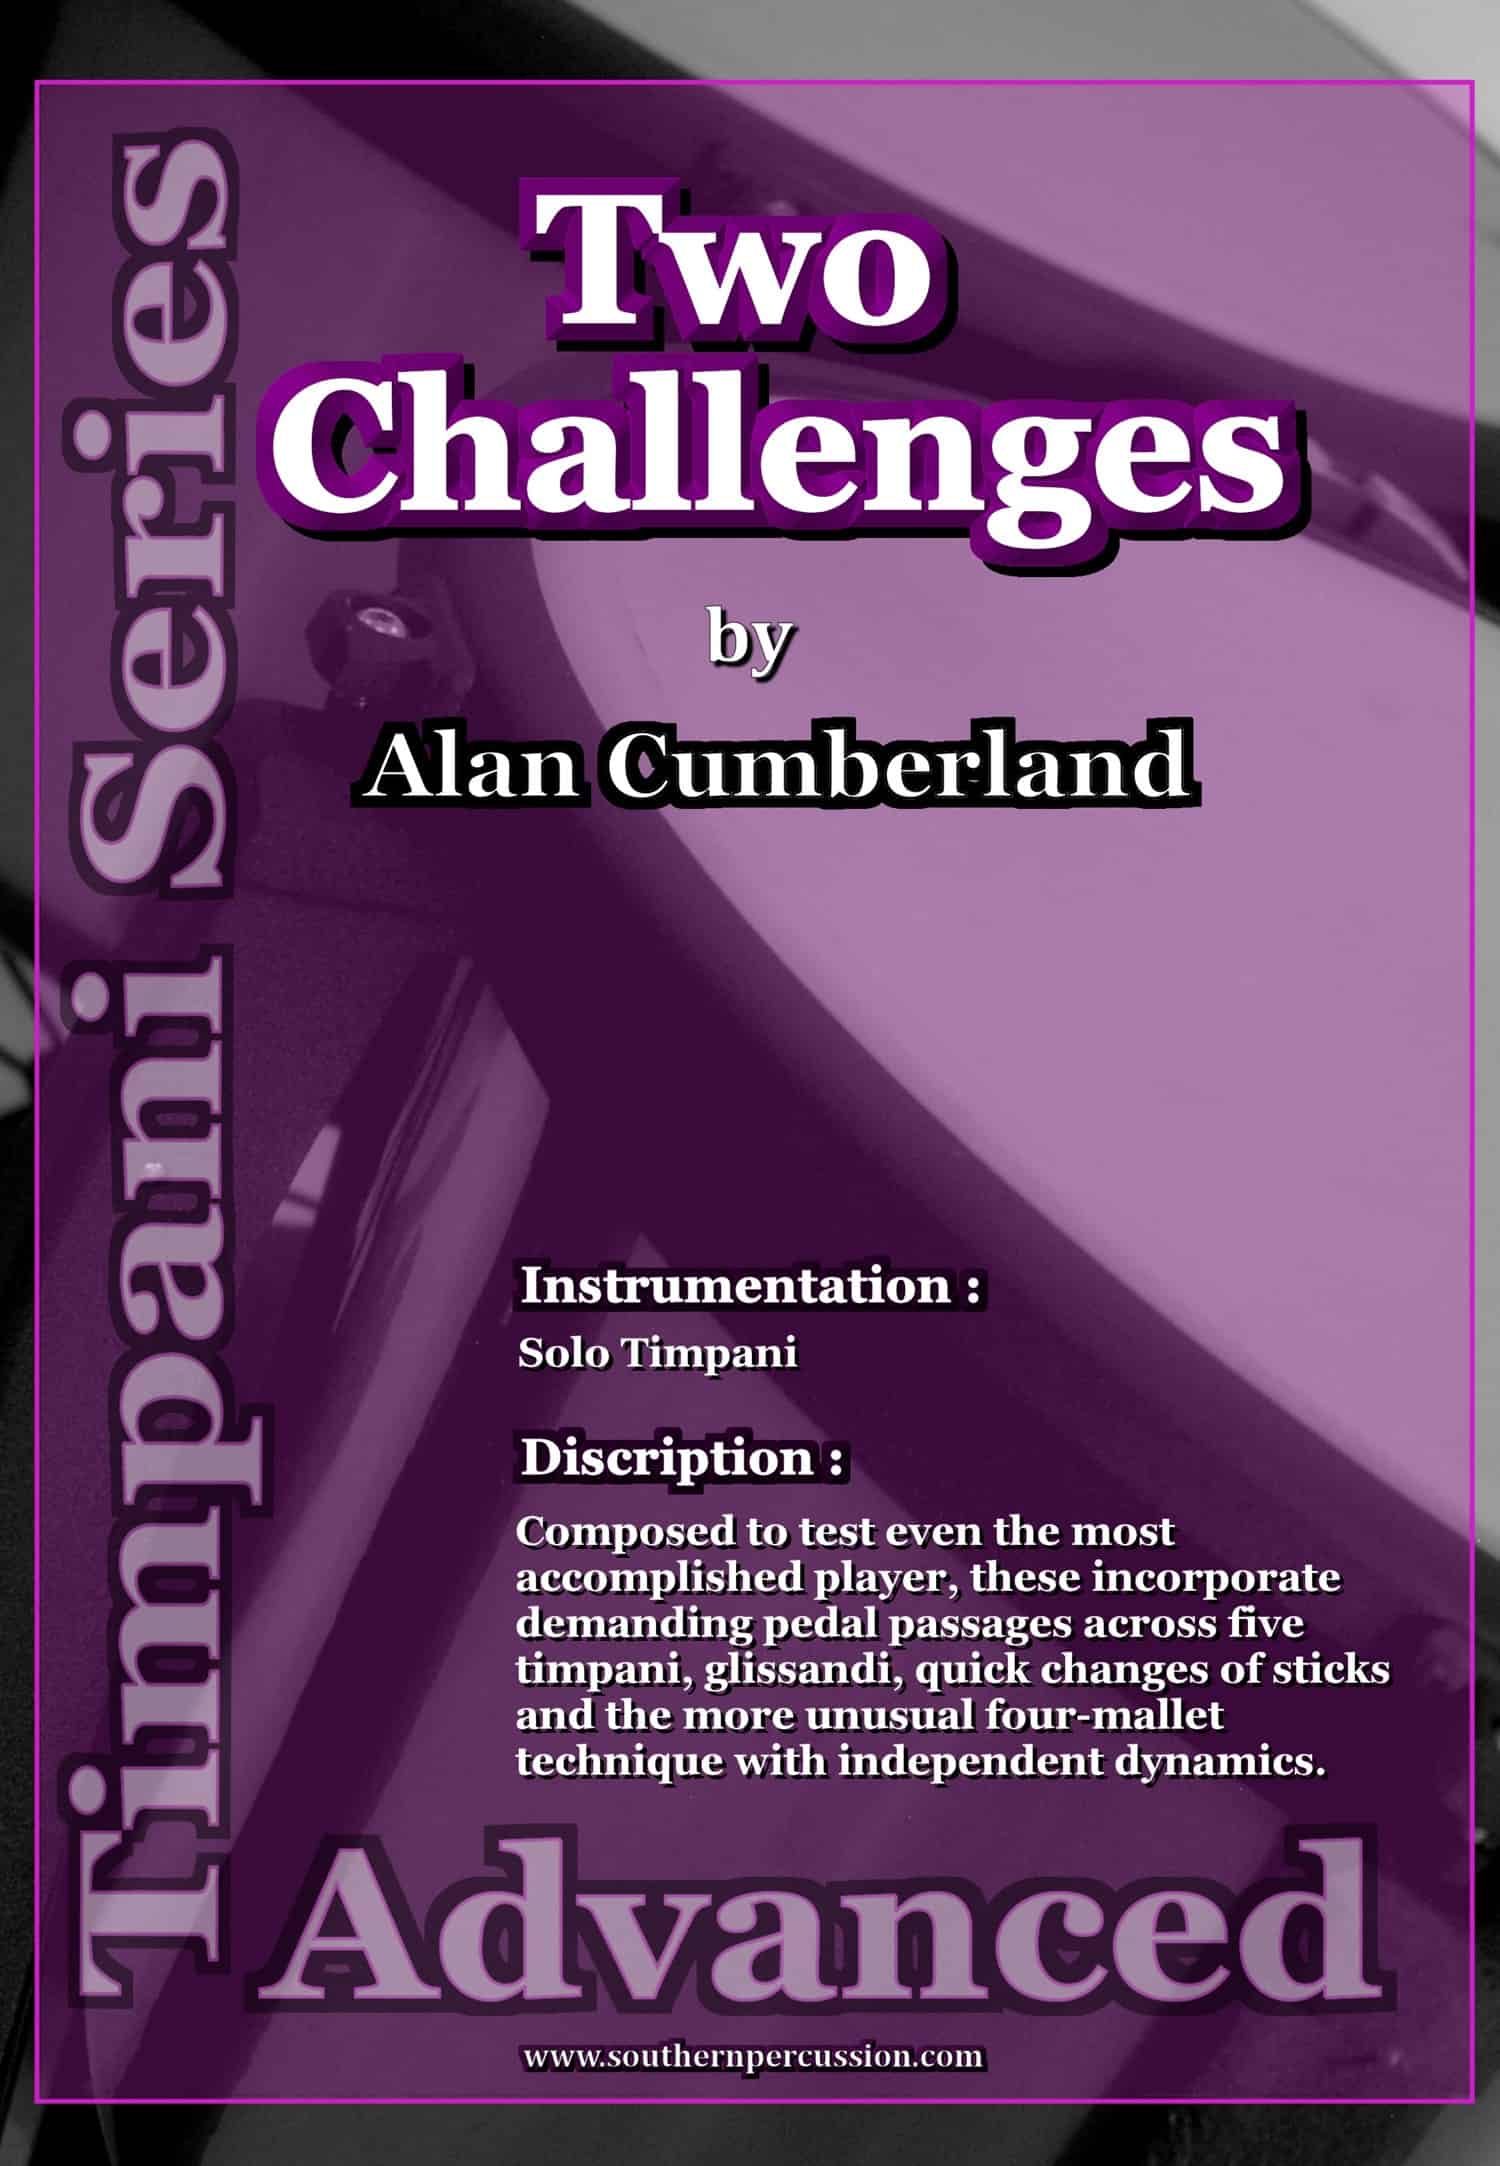 Two Challenges For Timpani